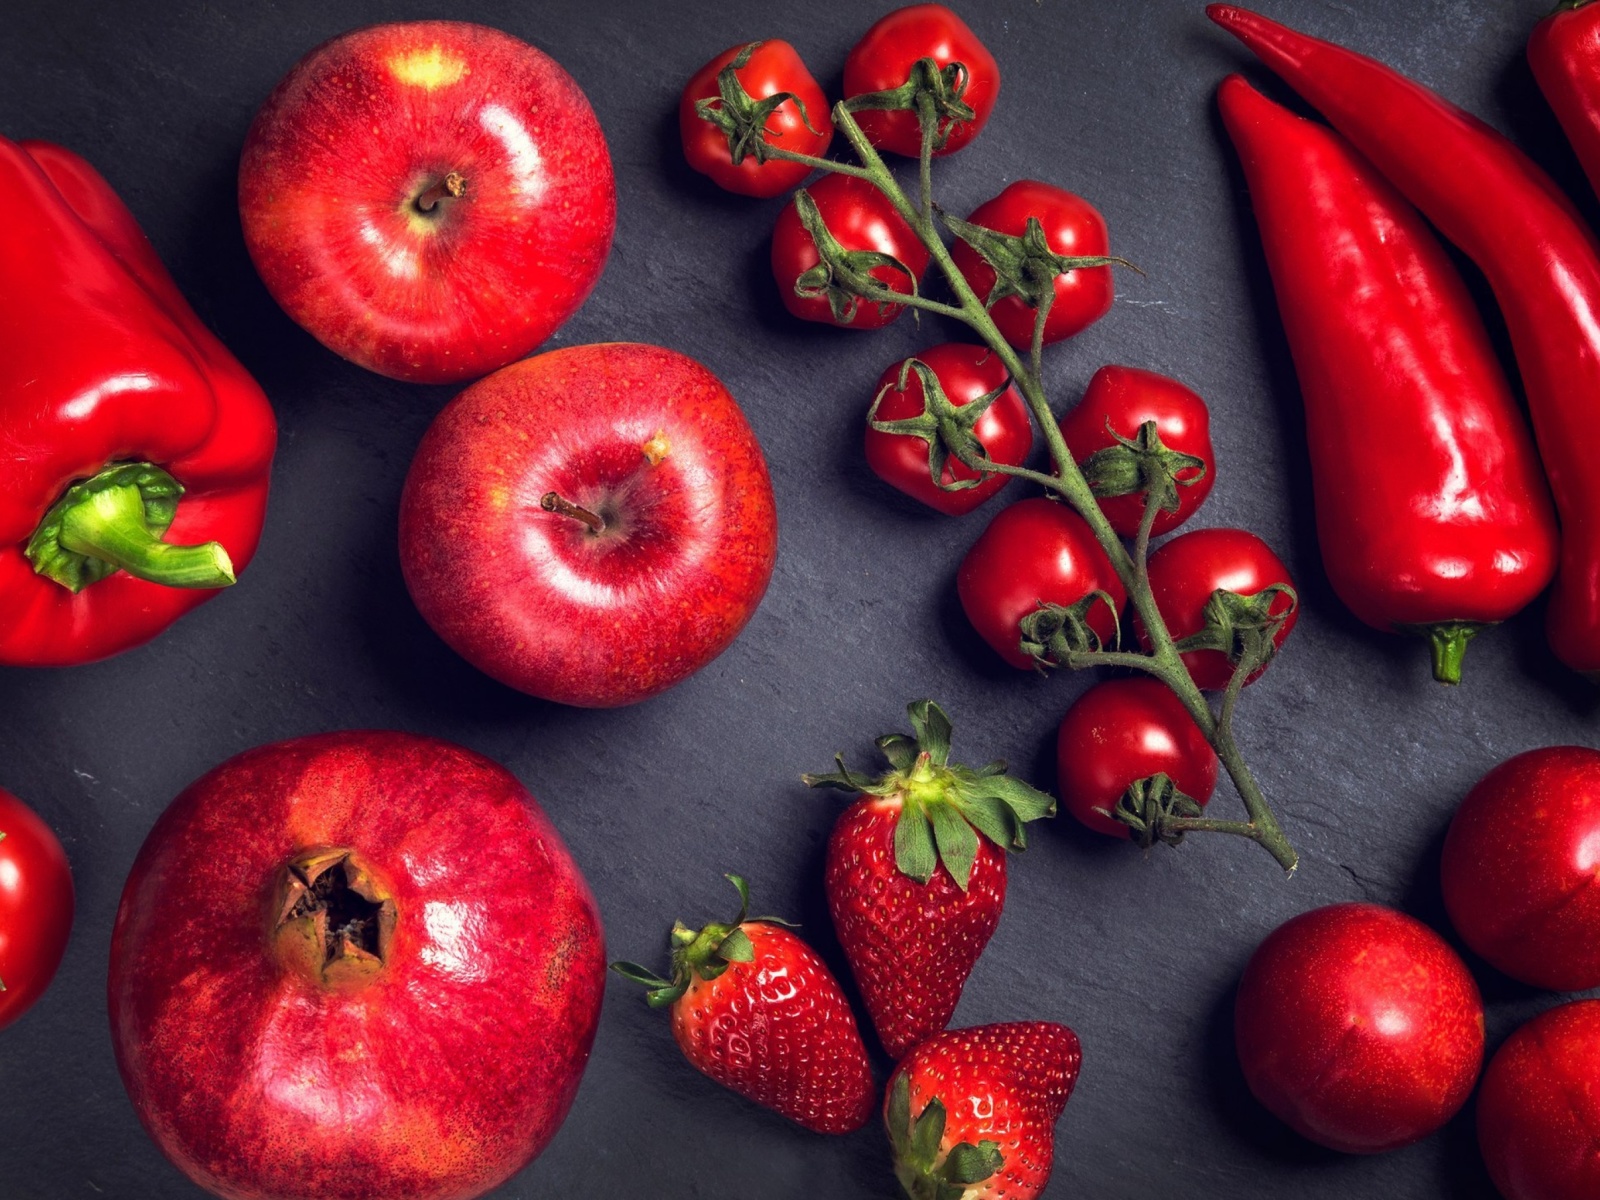 Red fruits and vegetables screenshot #1 1600x1200